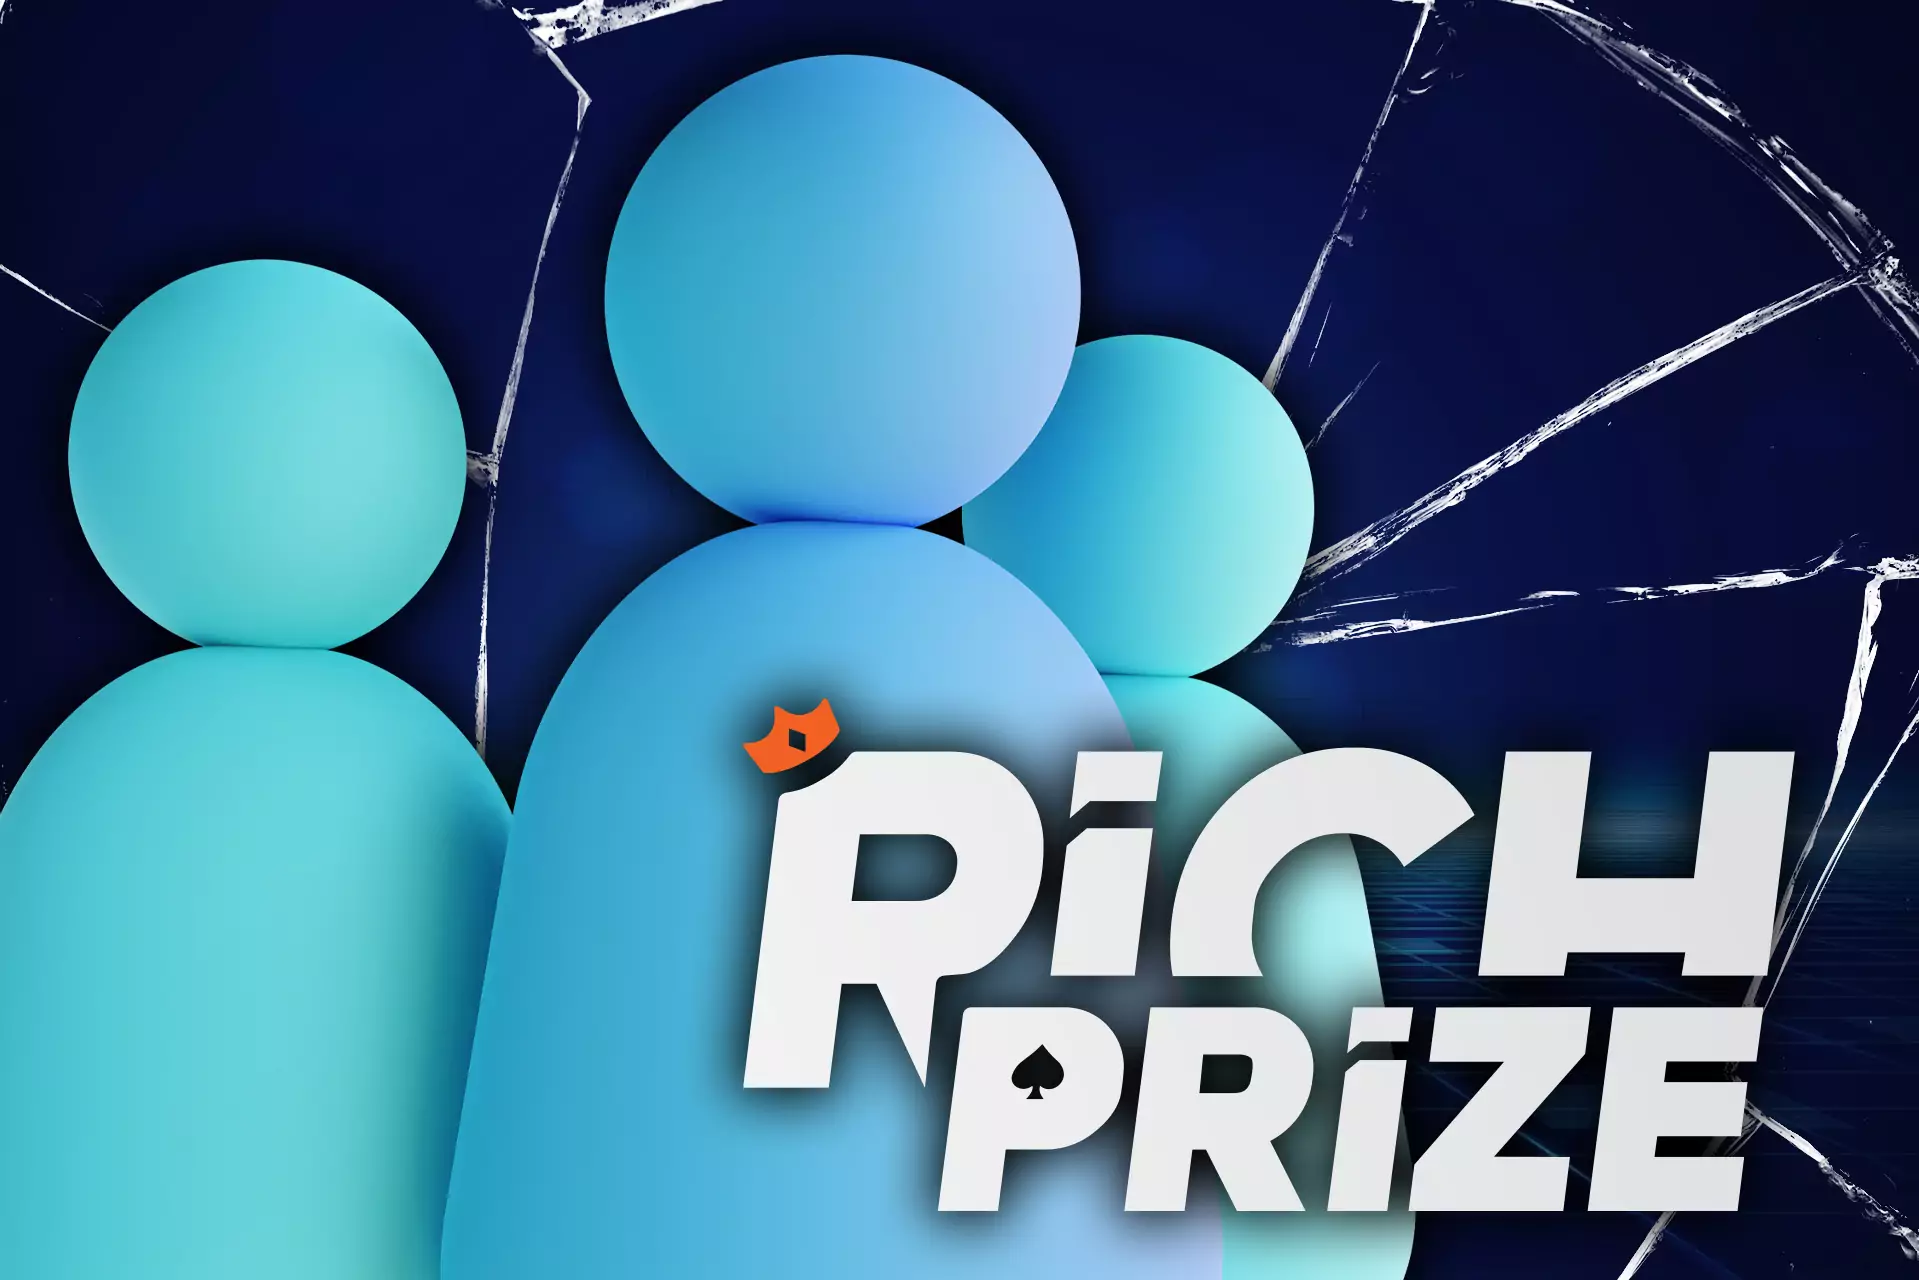 You can earn additional money if you join the referral program of RichPrize.